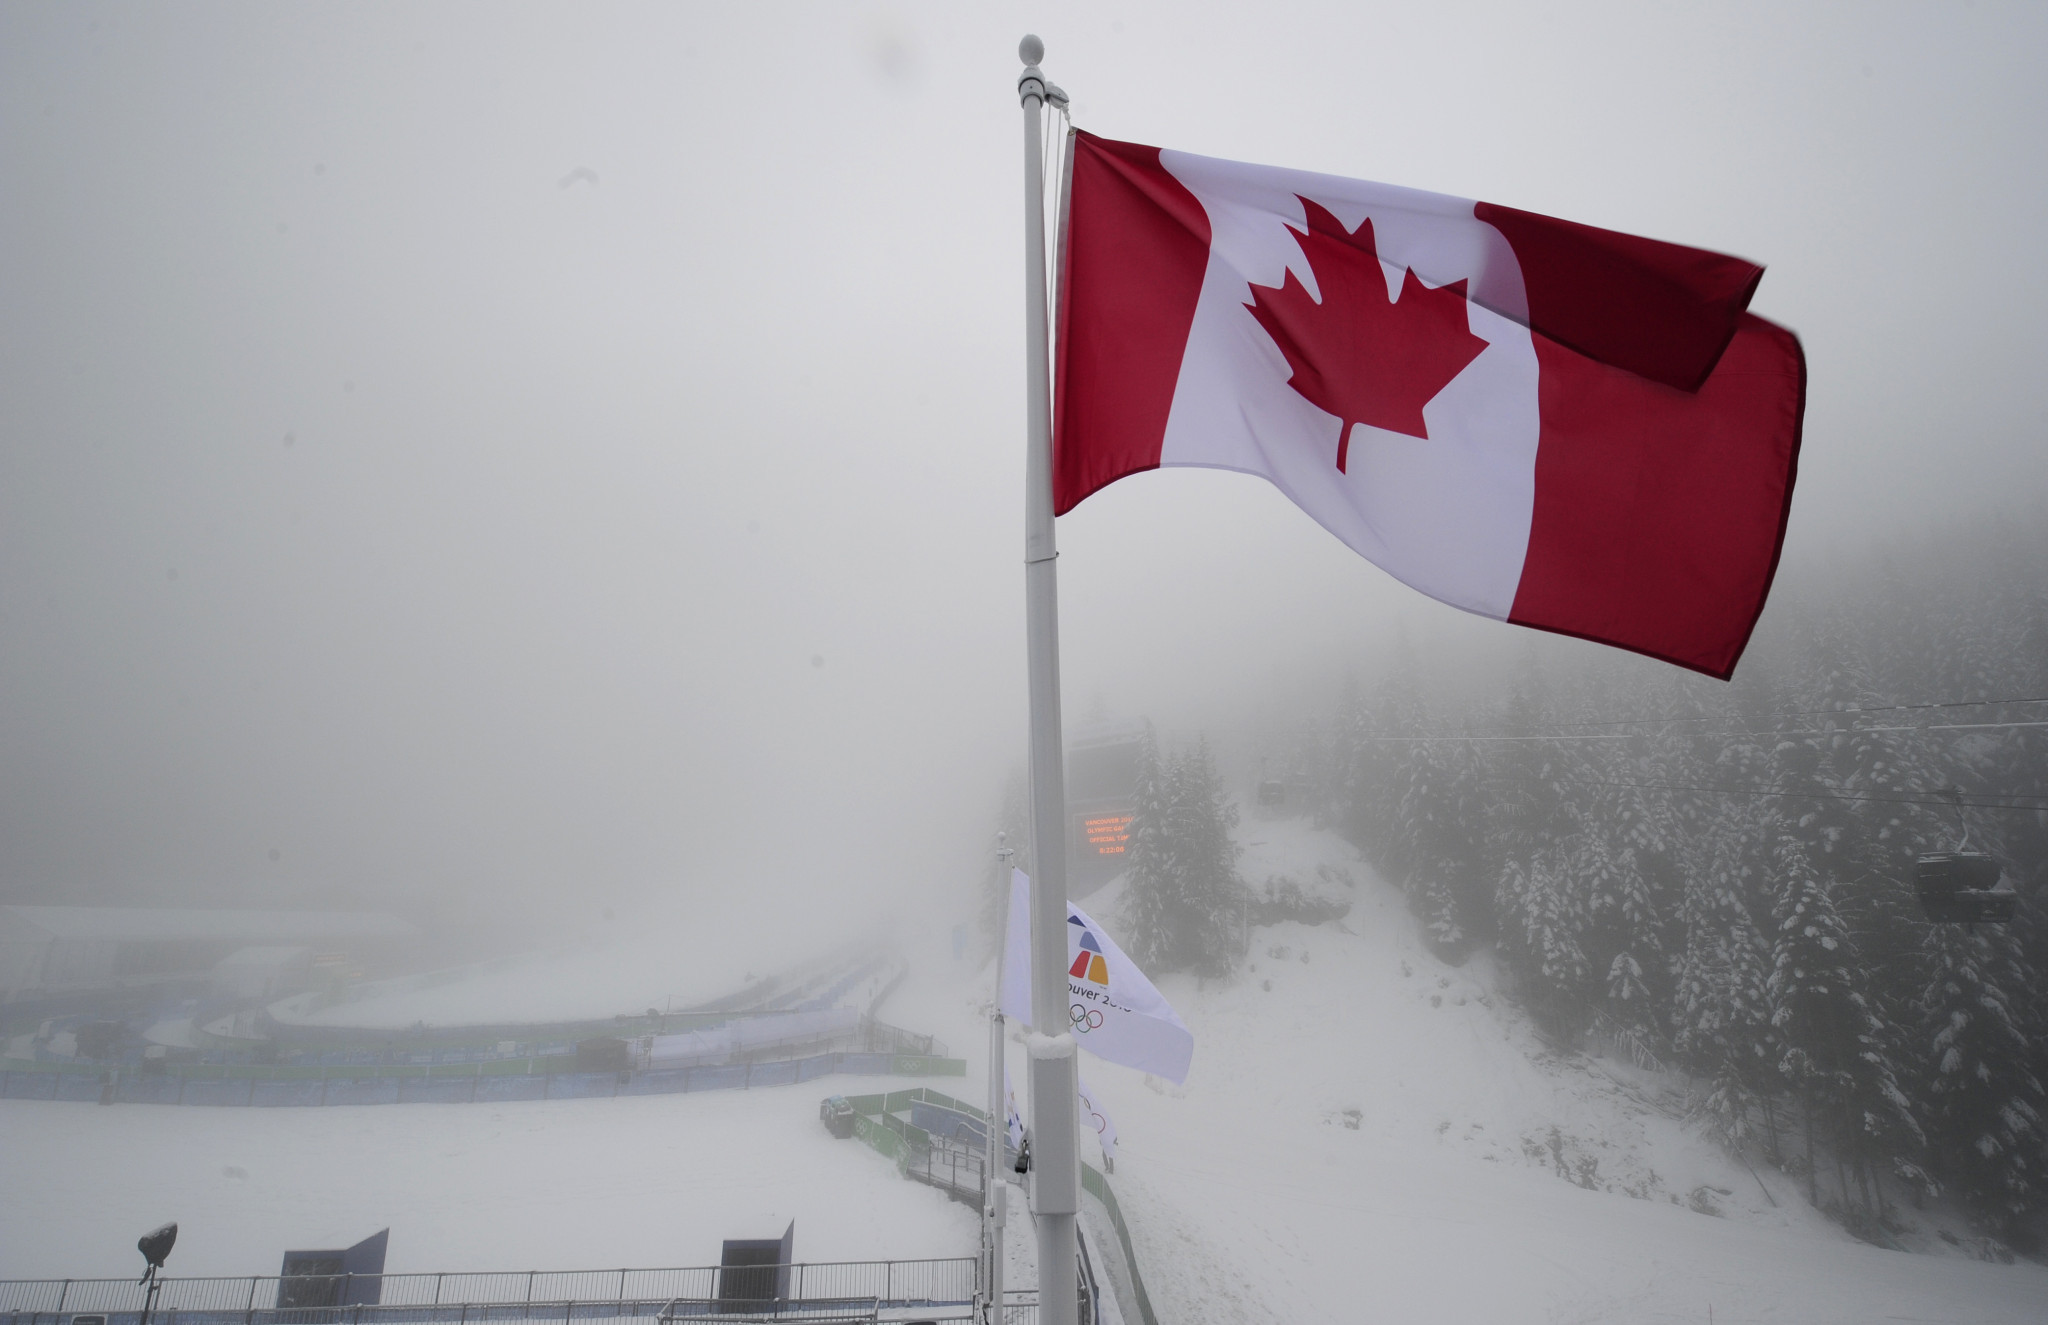 Canadian bobsleigh and skeleton athletes have criticised issues around governance, transparency and athlete safety ©Getty Images